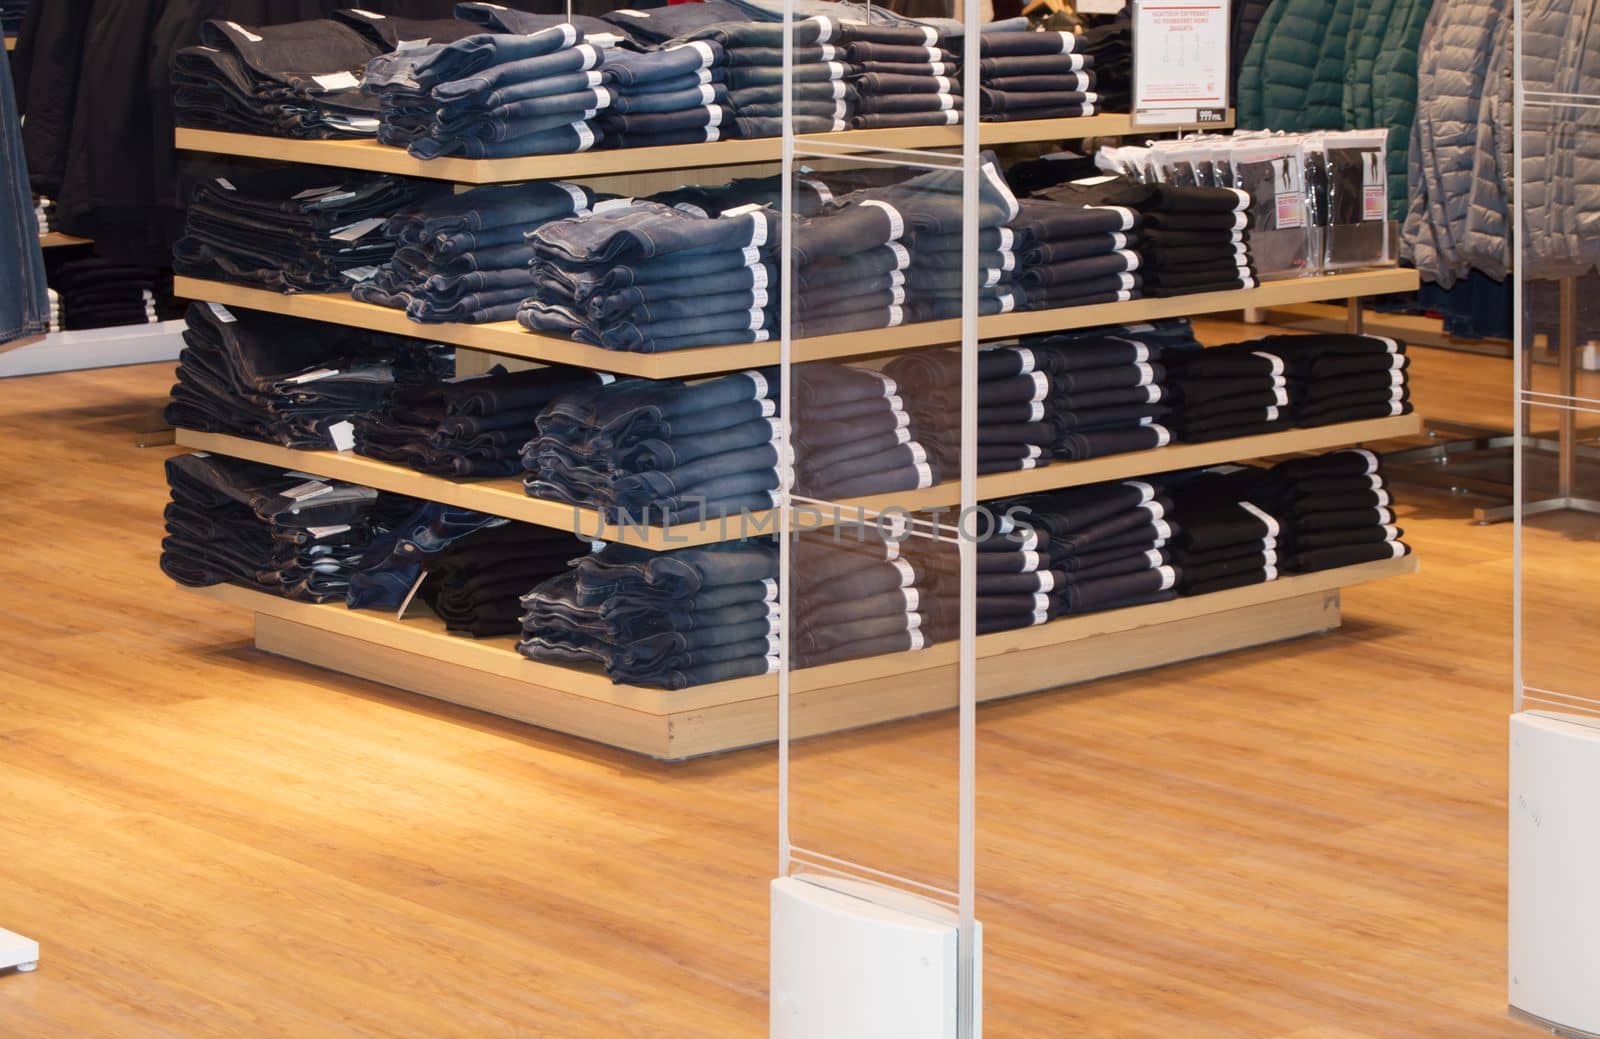 Jeans are stacked on the counter in a clothing store.